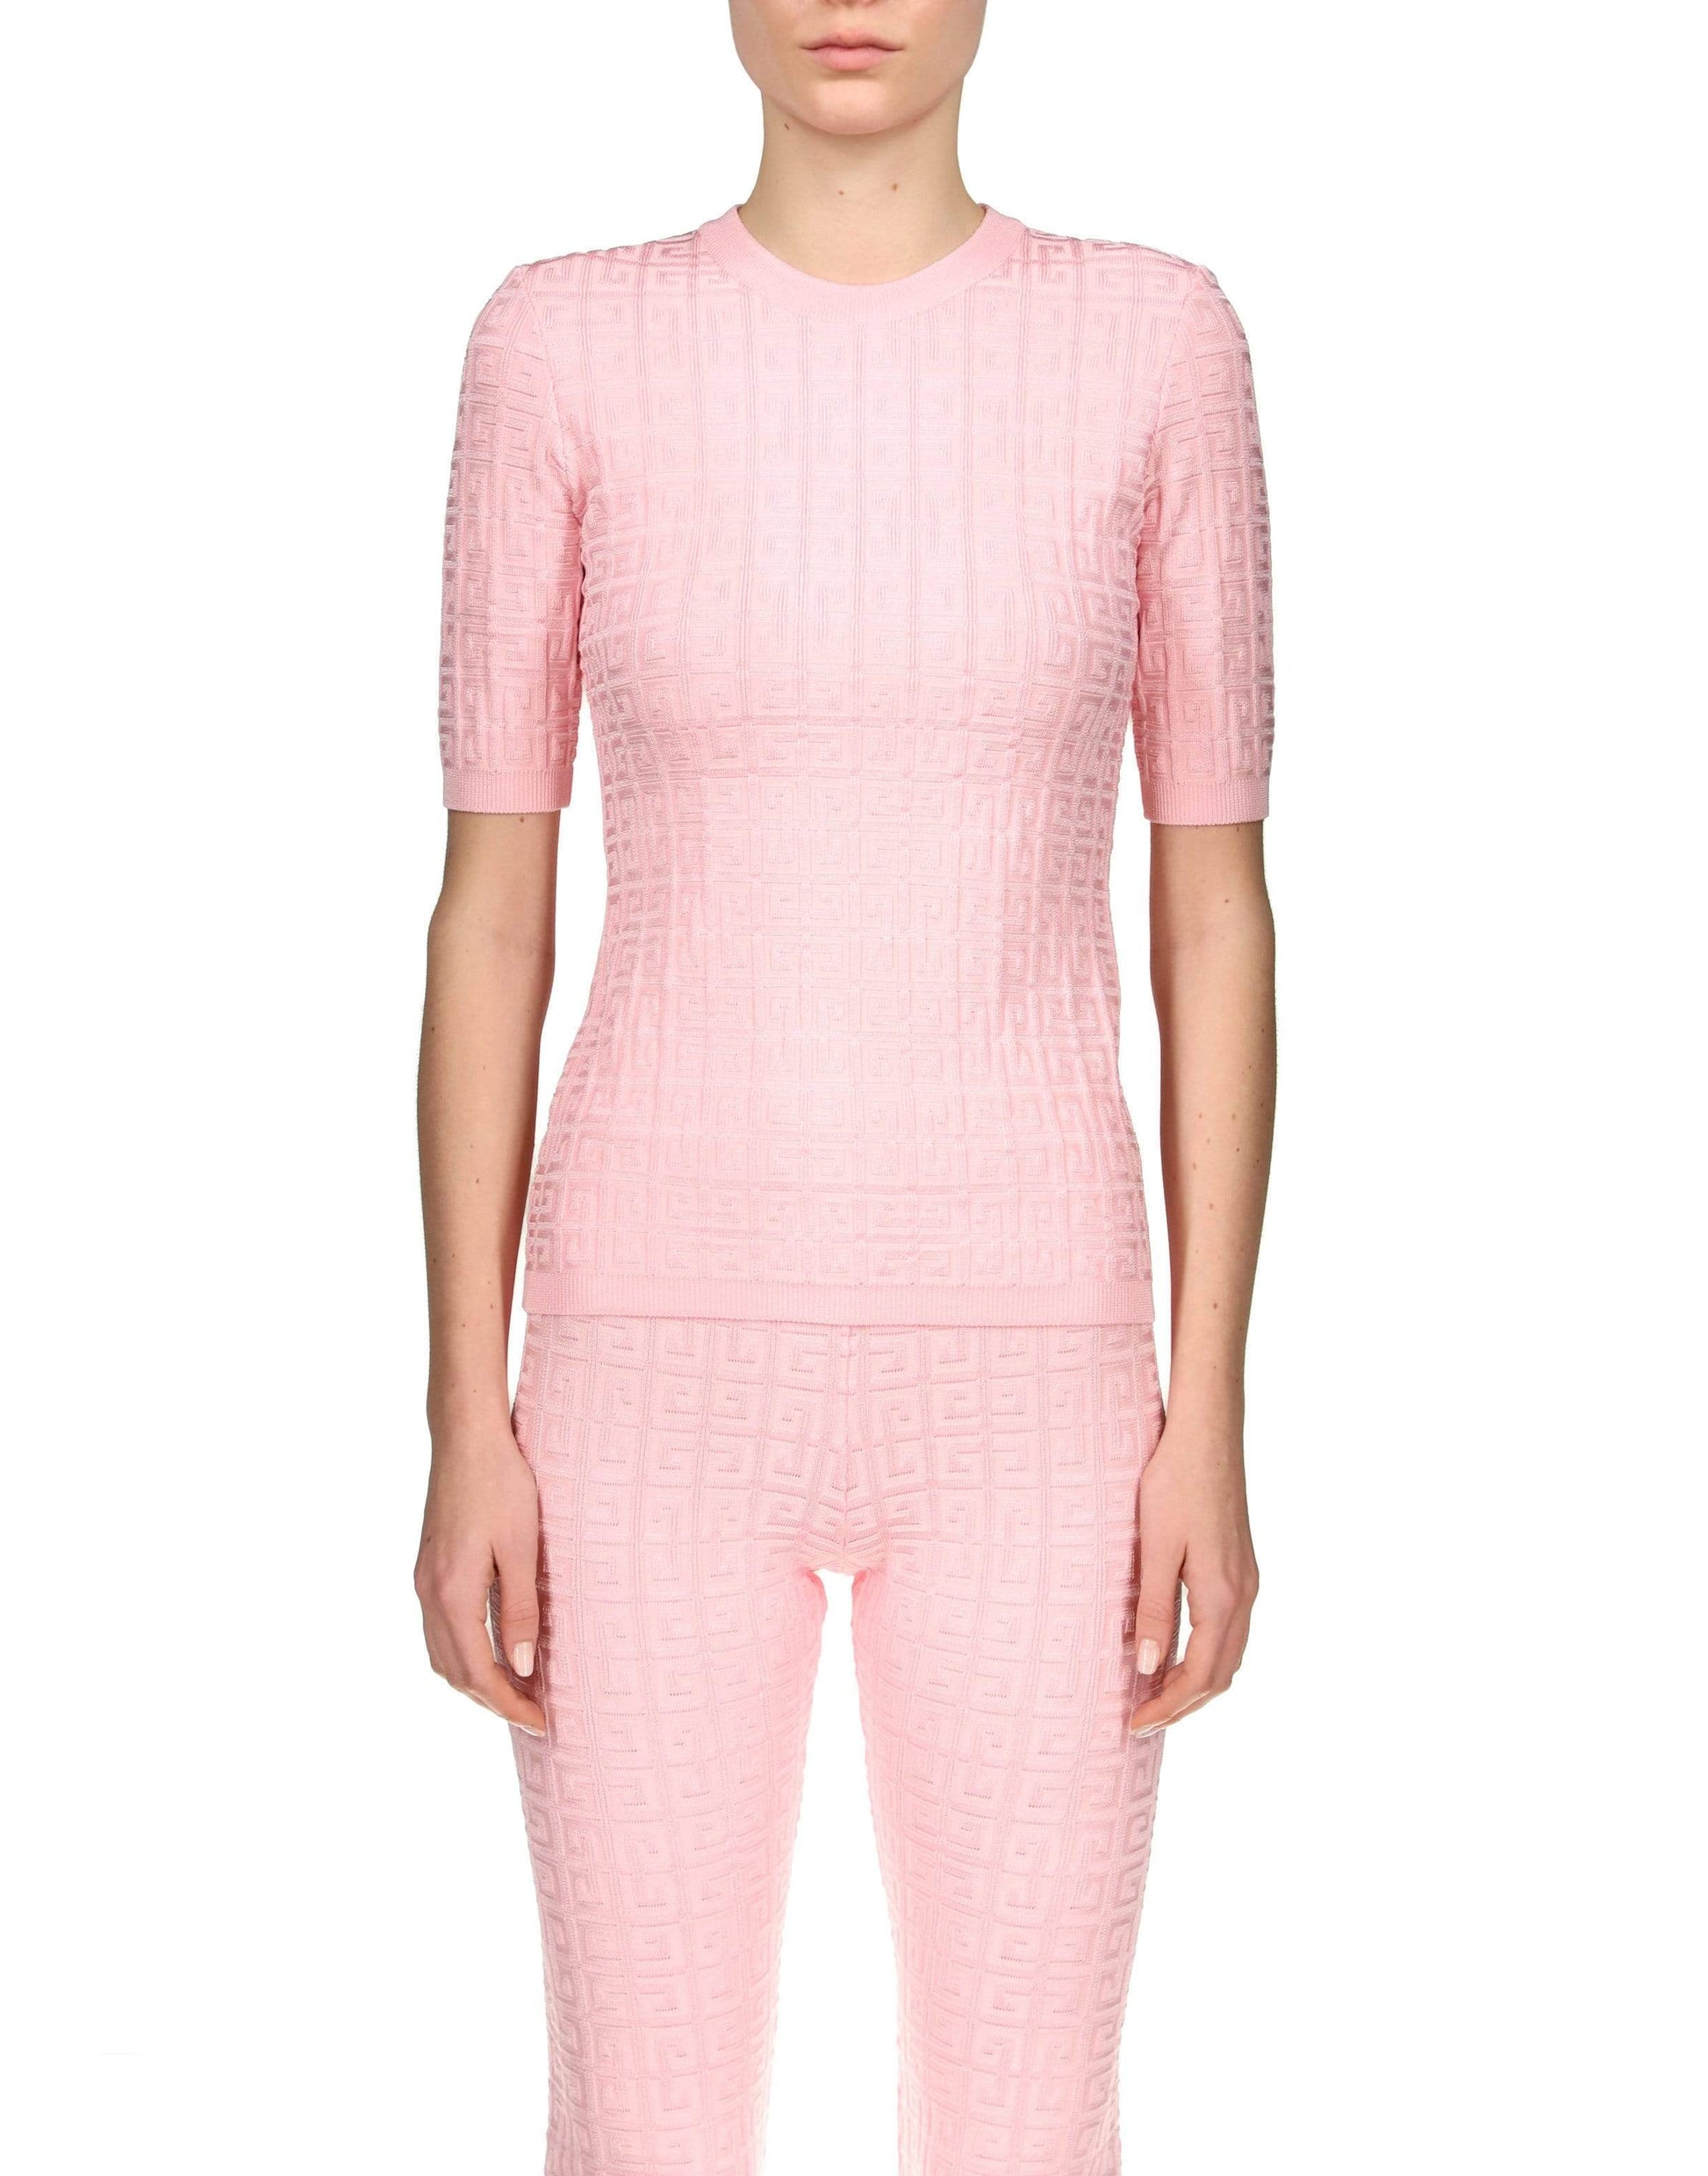 GIVENCHY-4G Light Pink Monogram Allover Sweater-